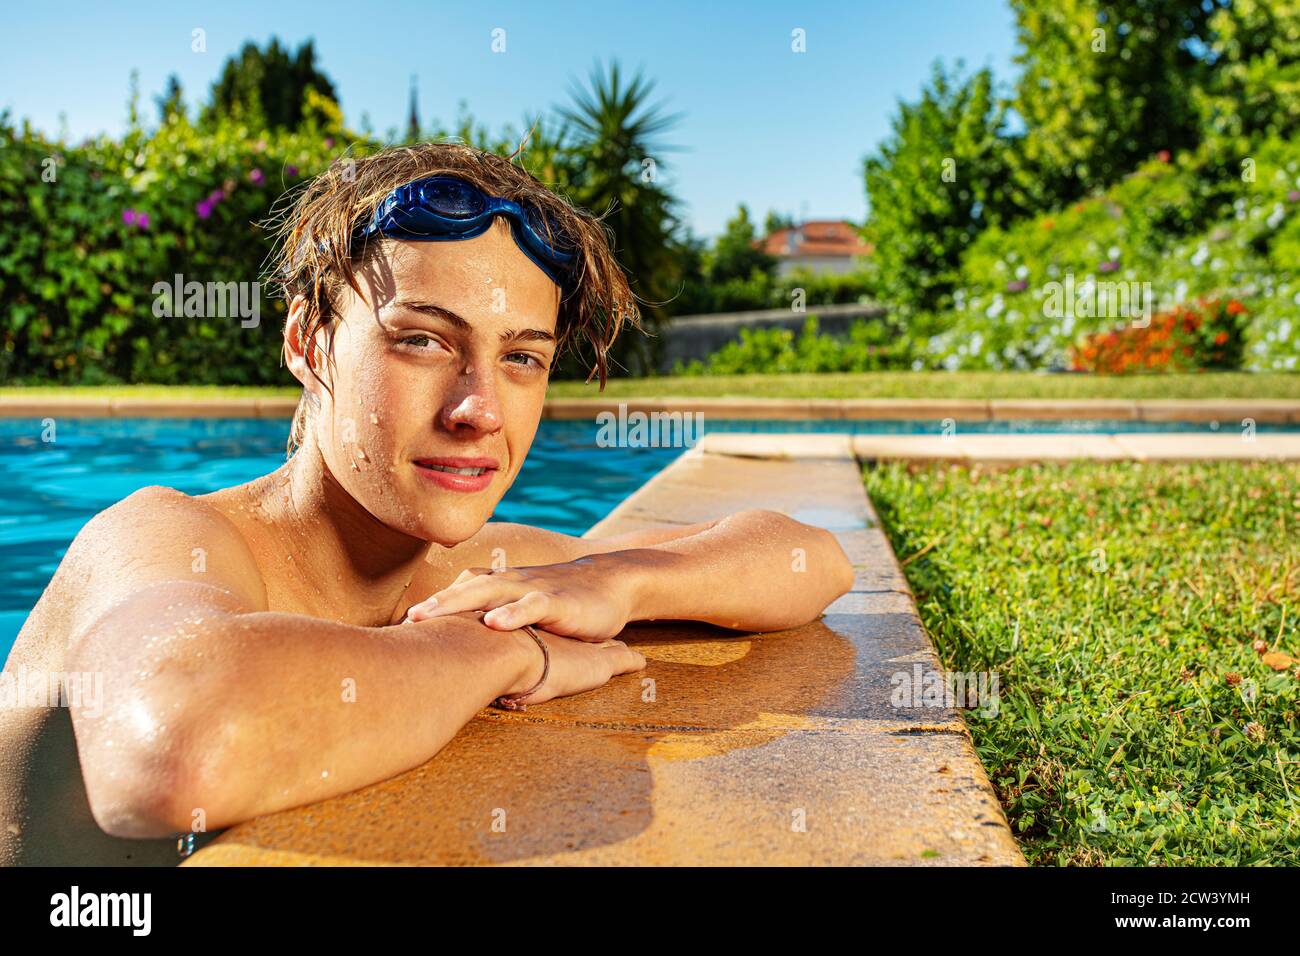 View from side of a handsome boy on the border of swimming pool with calm expression Stock Photo